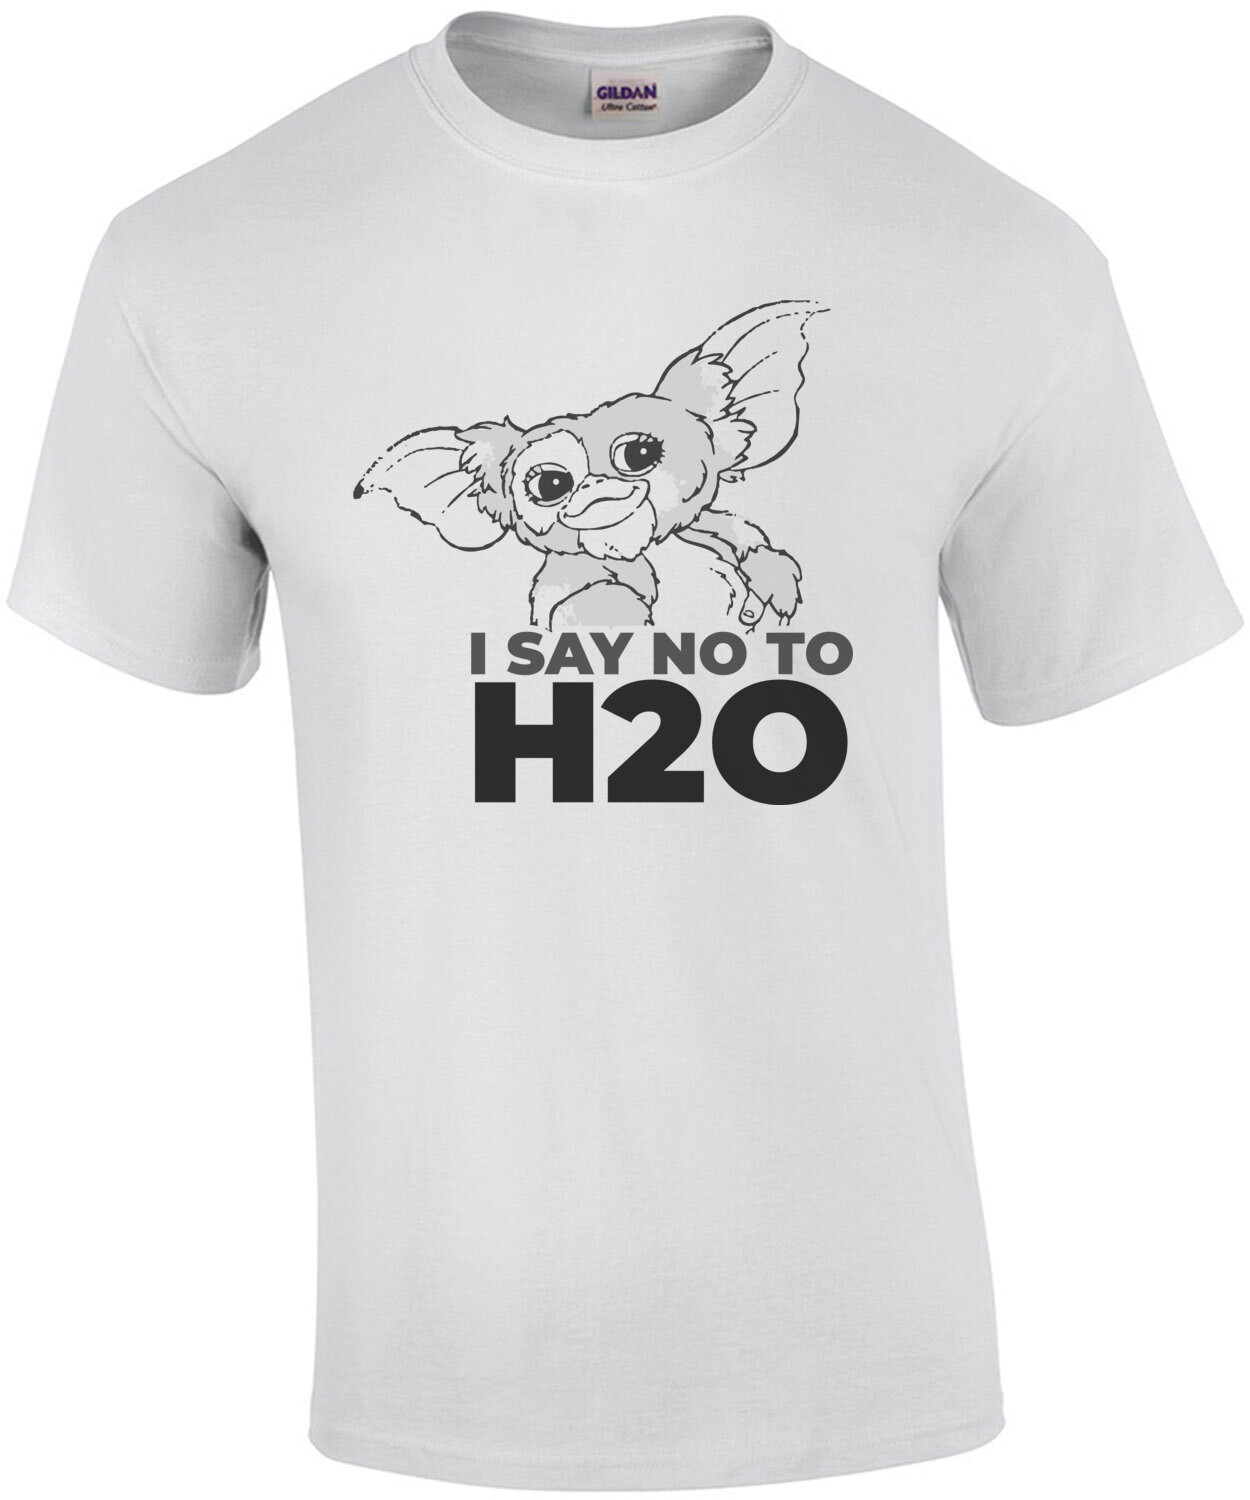 I say NO to H20 - Gizmo - Gremlins - 80's T-Shirt